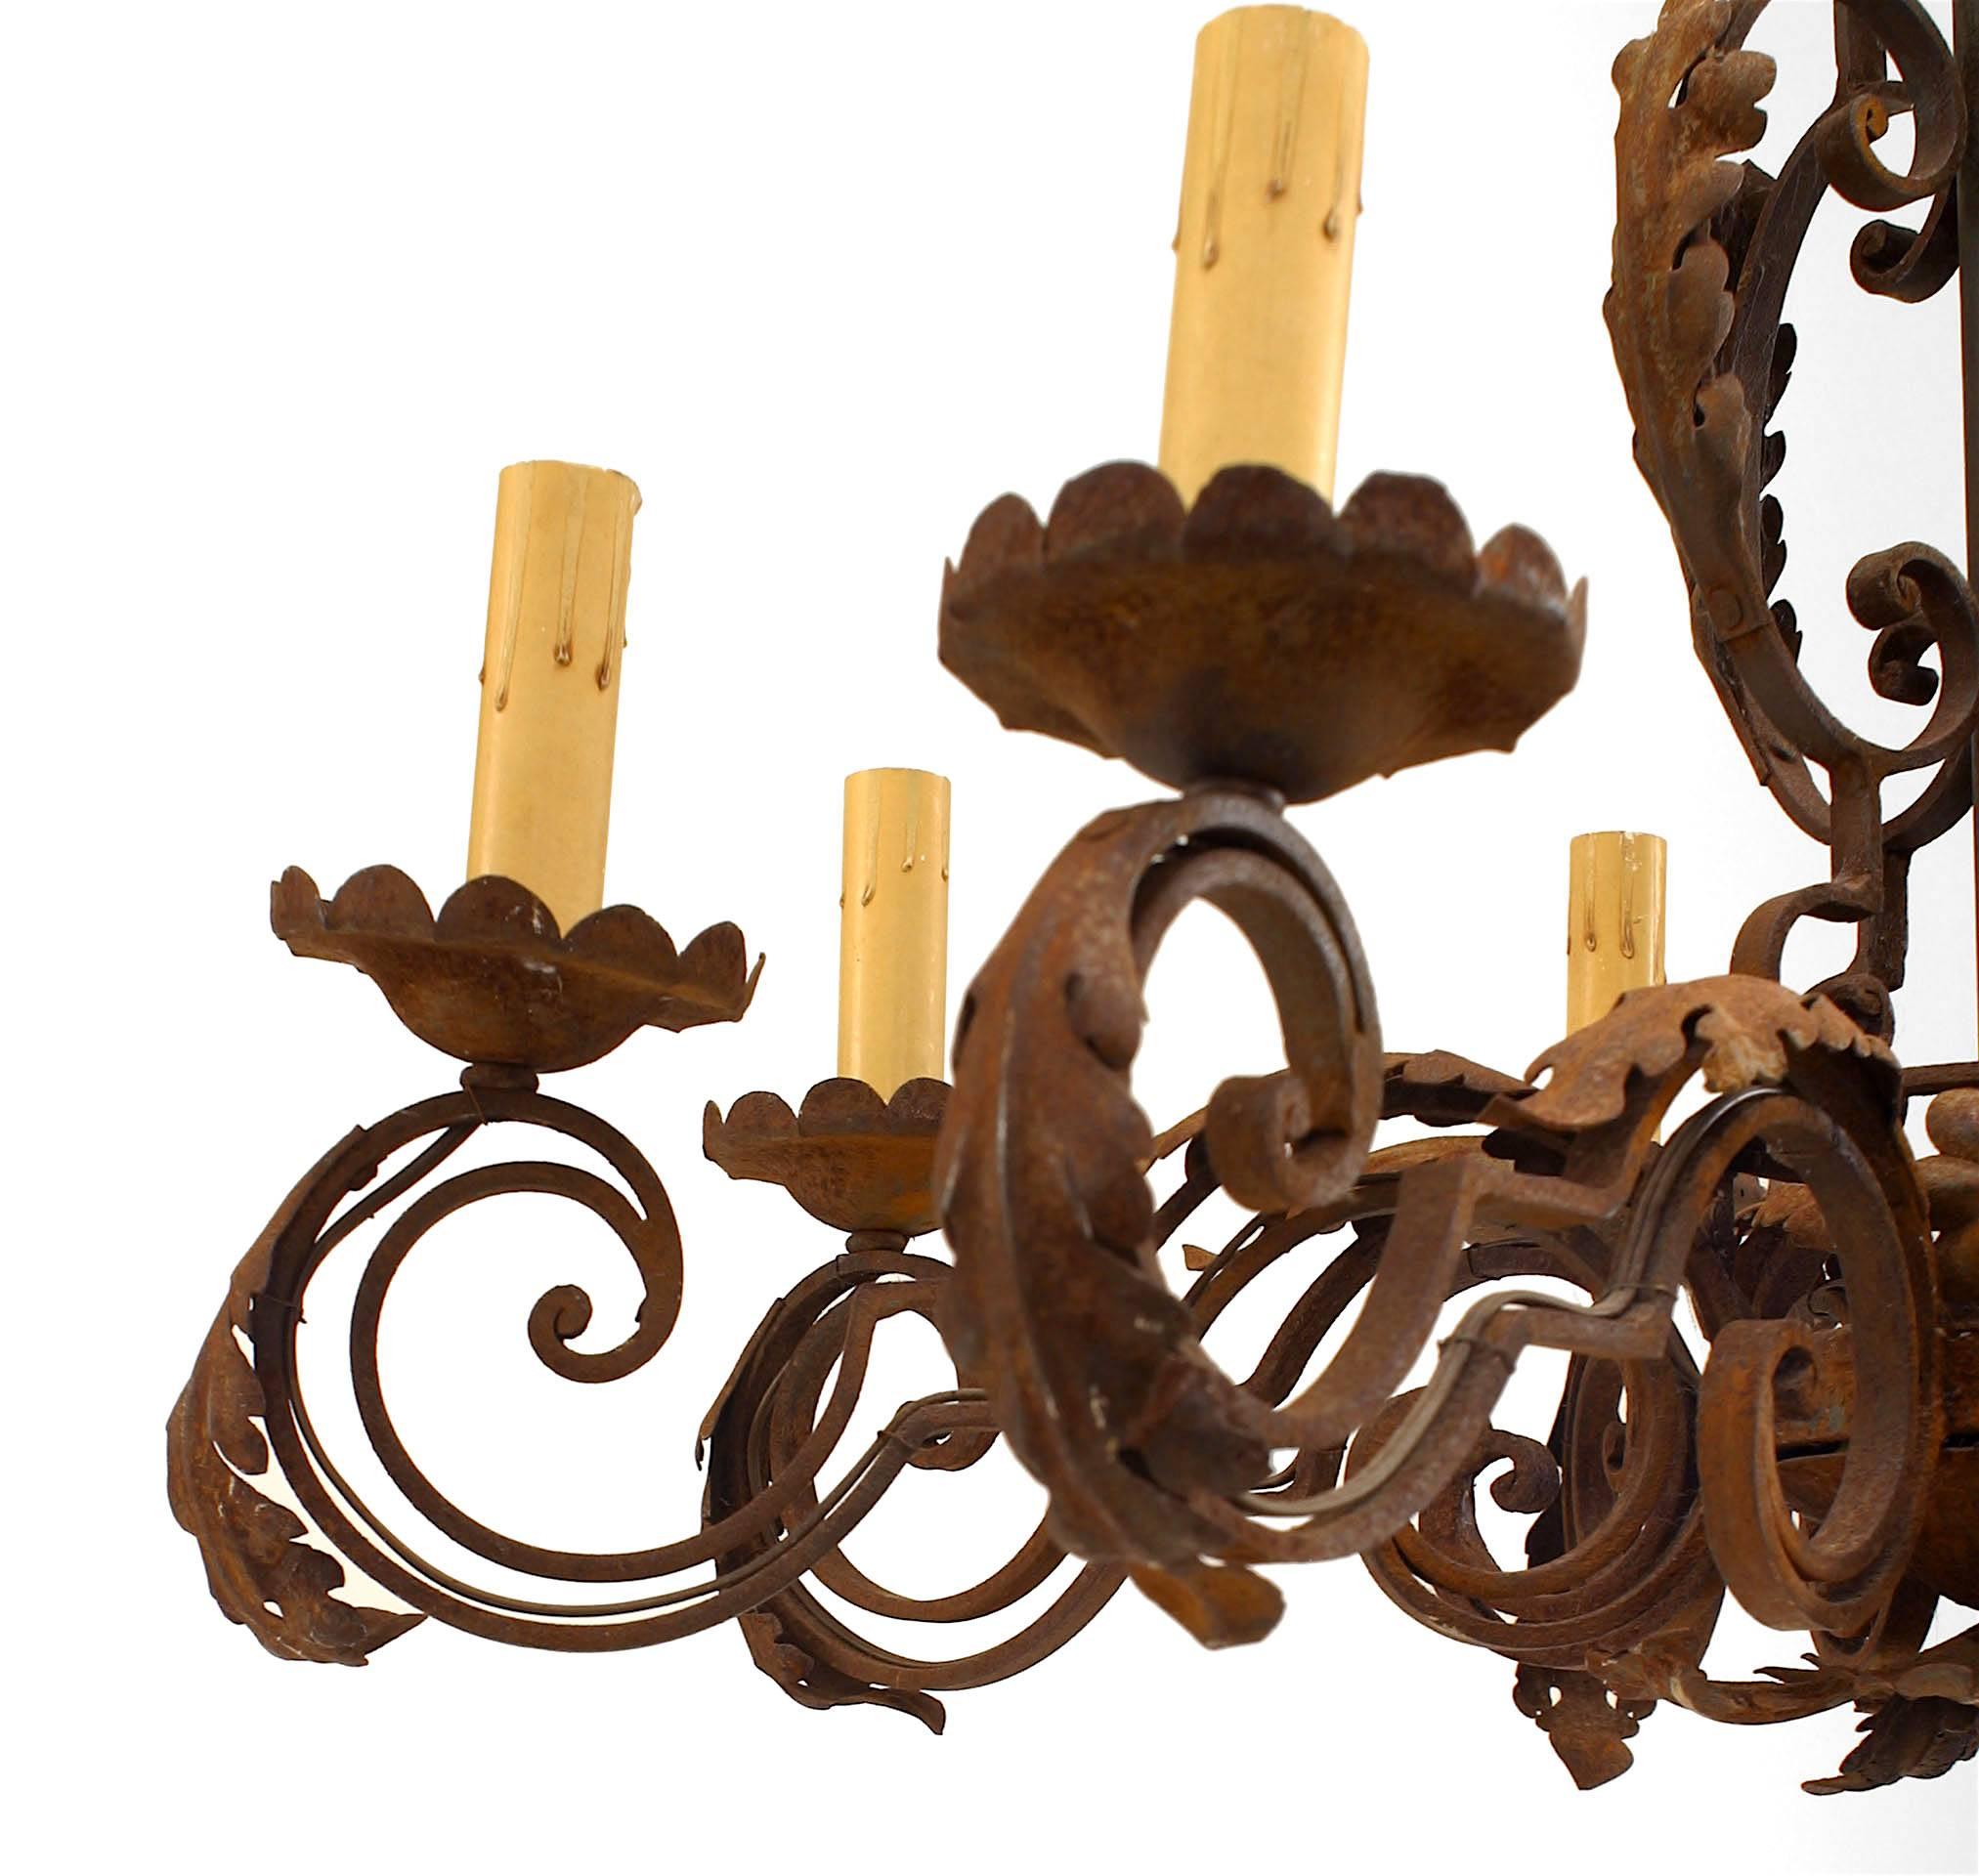 Italian Renaissance-style (20th Century) wrought iron chandelier with 8 scroll design arms and leaf trim.
